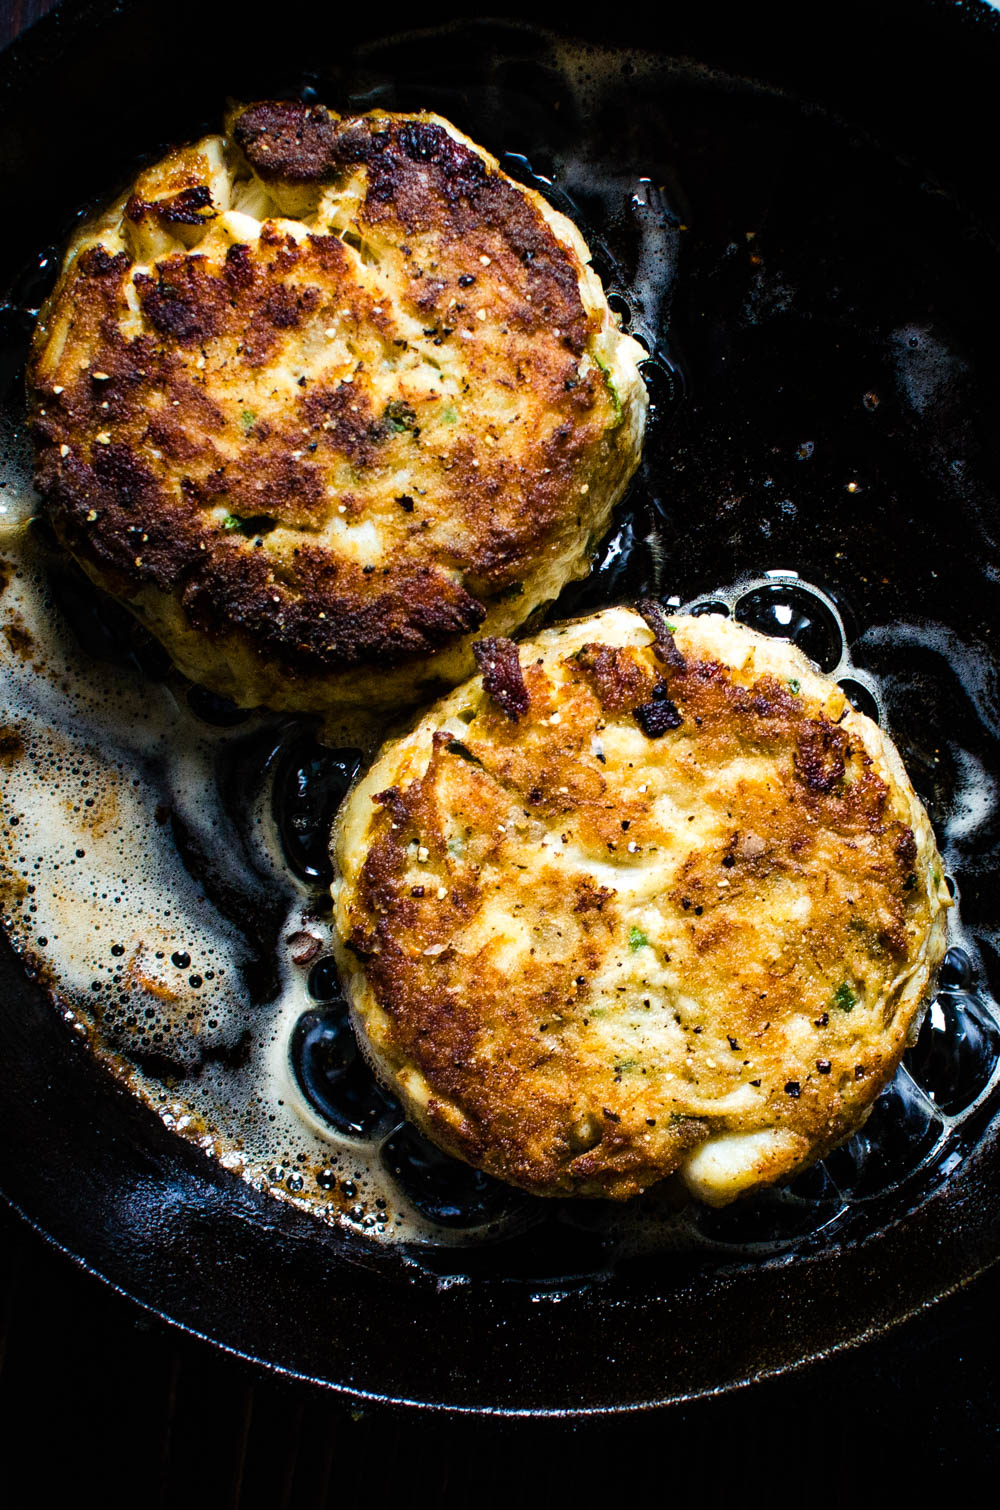 Frying crab cakes in a cast iron skillet.